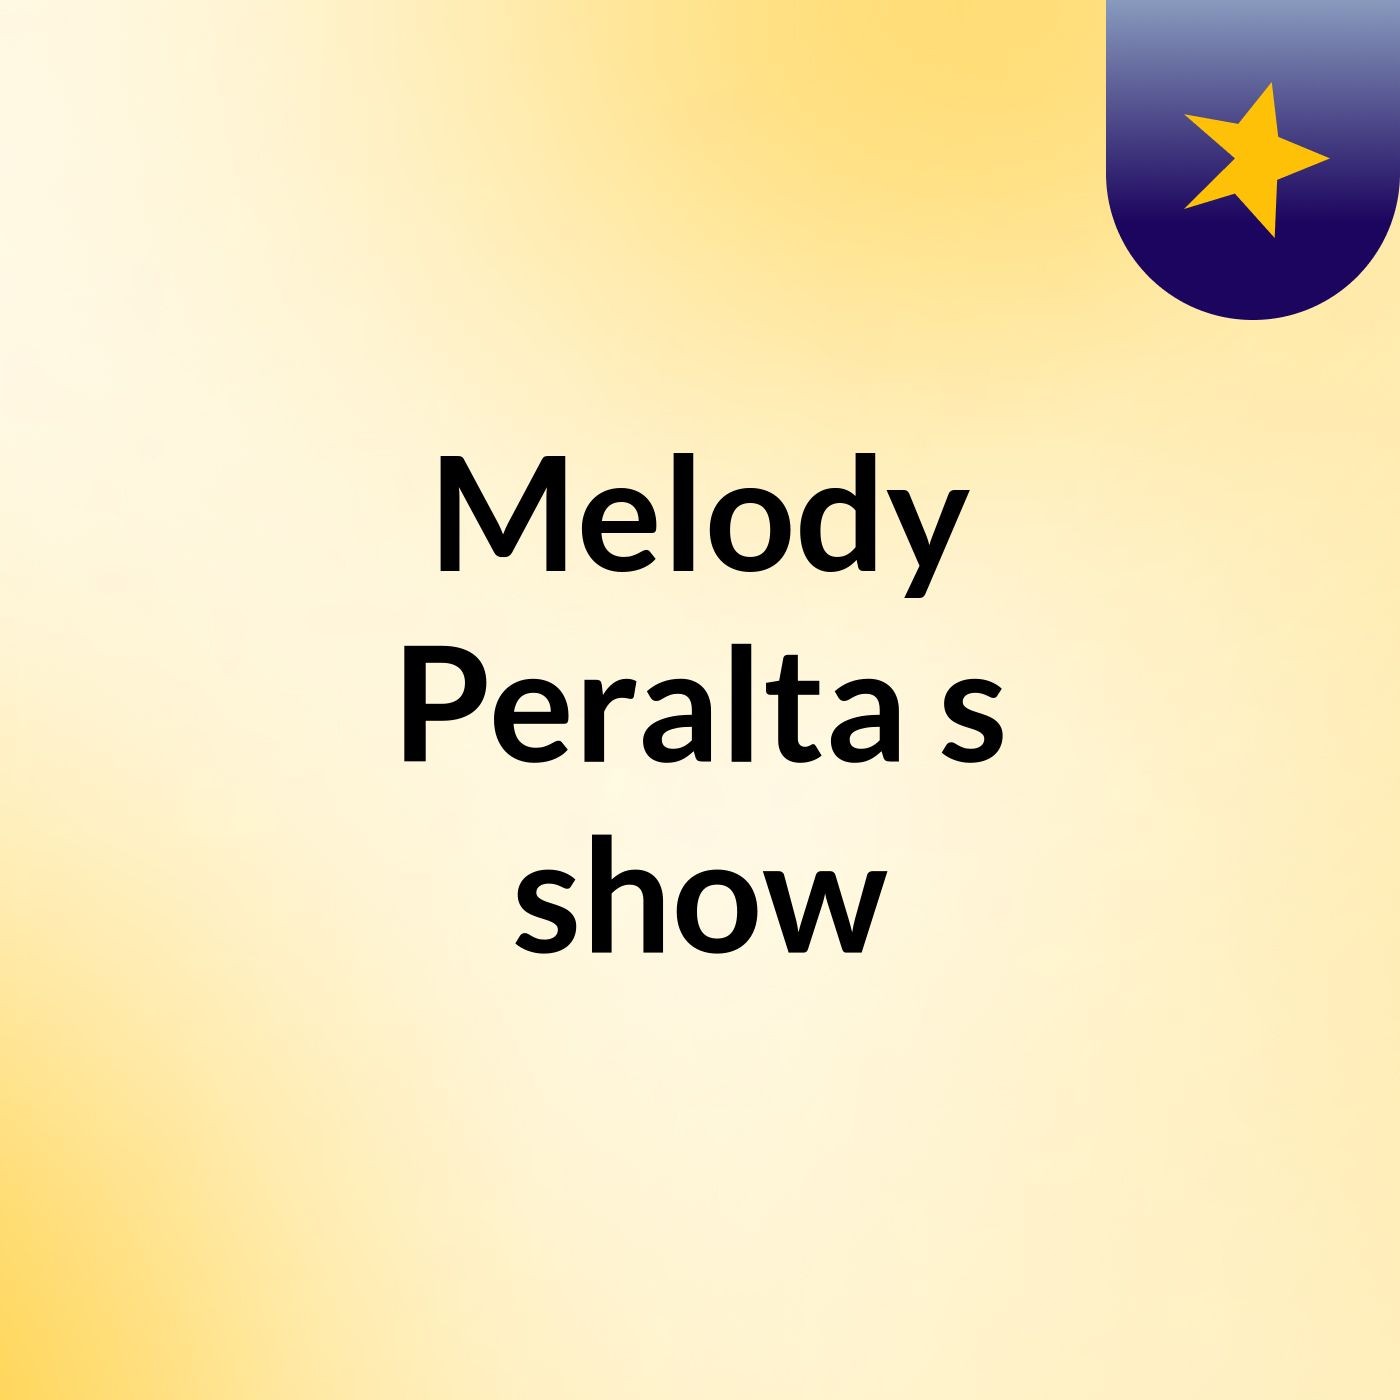 Melody Peralta's show